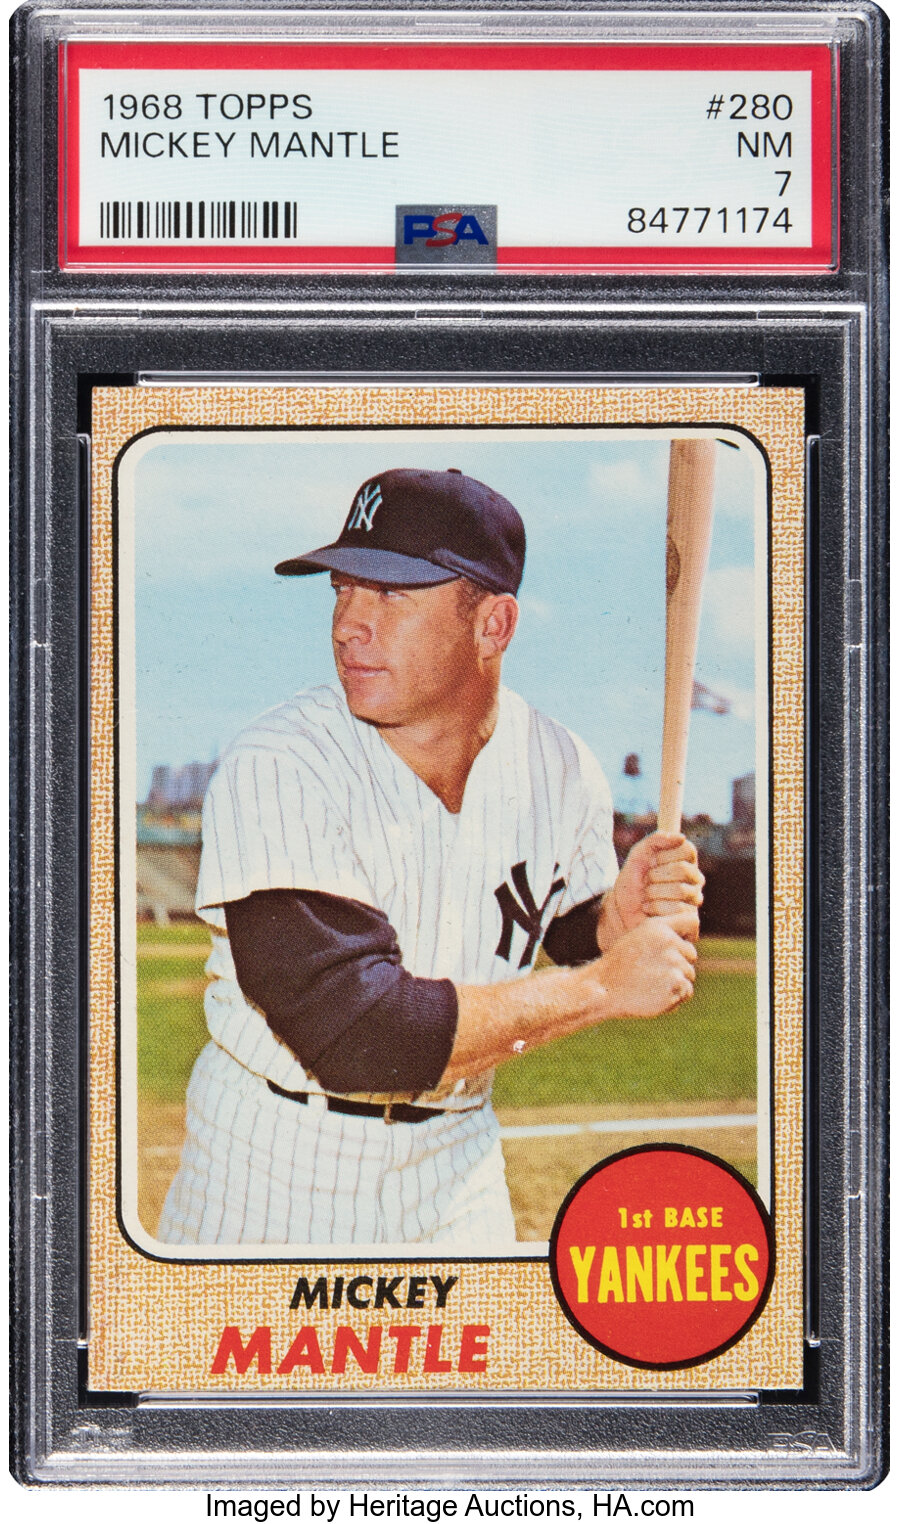 1968 Topps Mickey Mantle #280 PSA NM 7